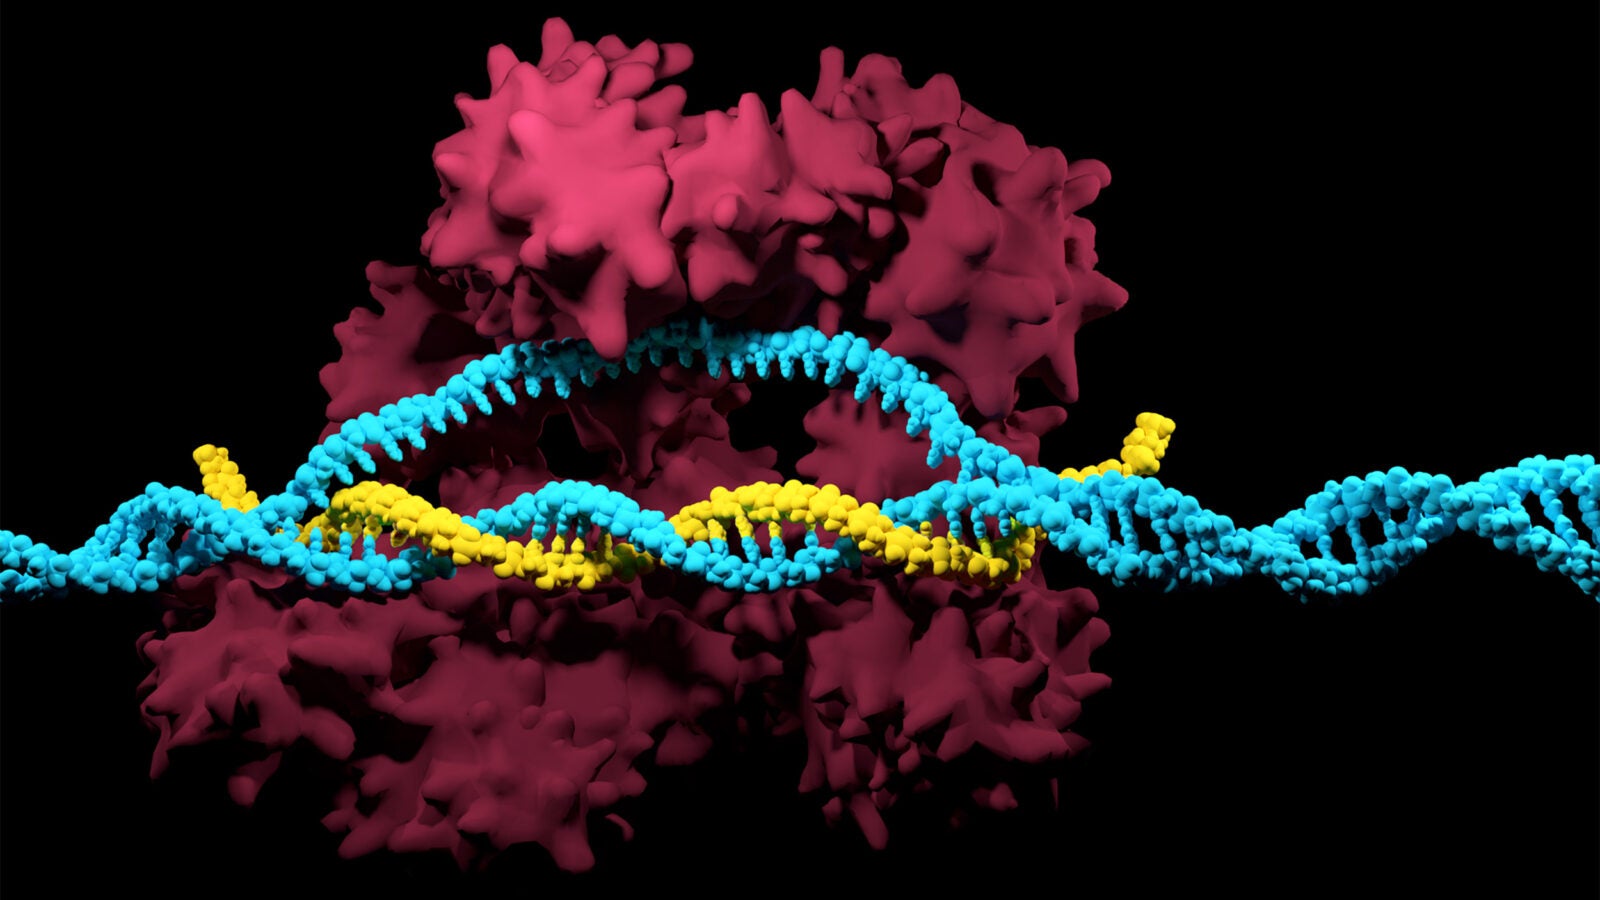 3D render of the CRISPR-Cas9 genome editing system